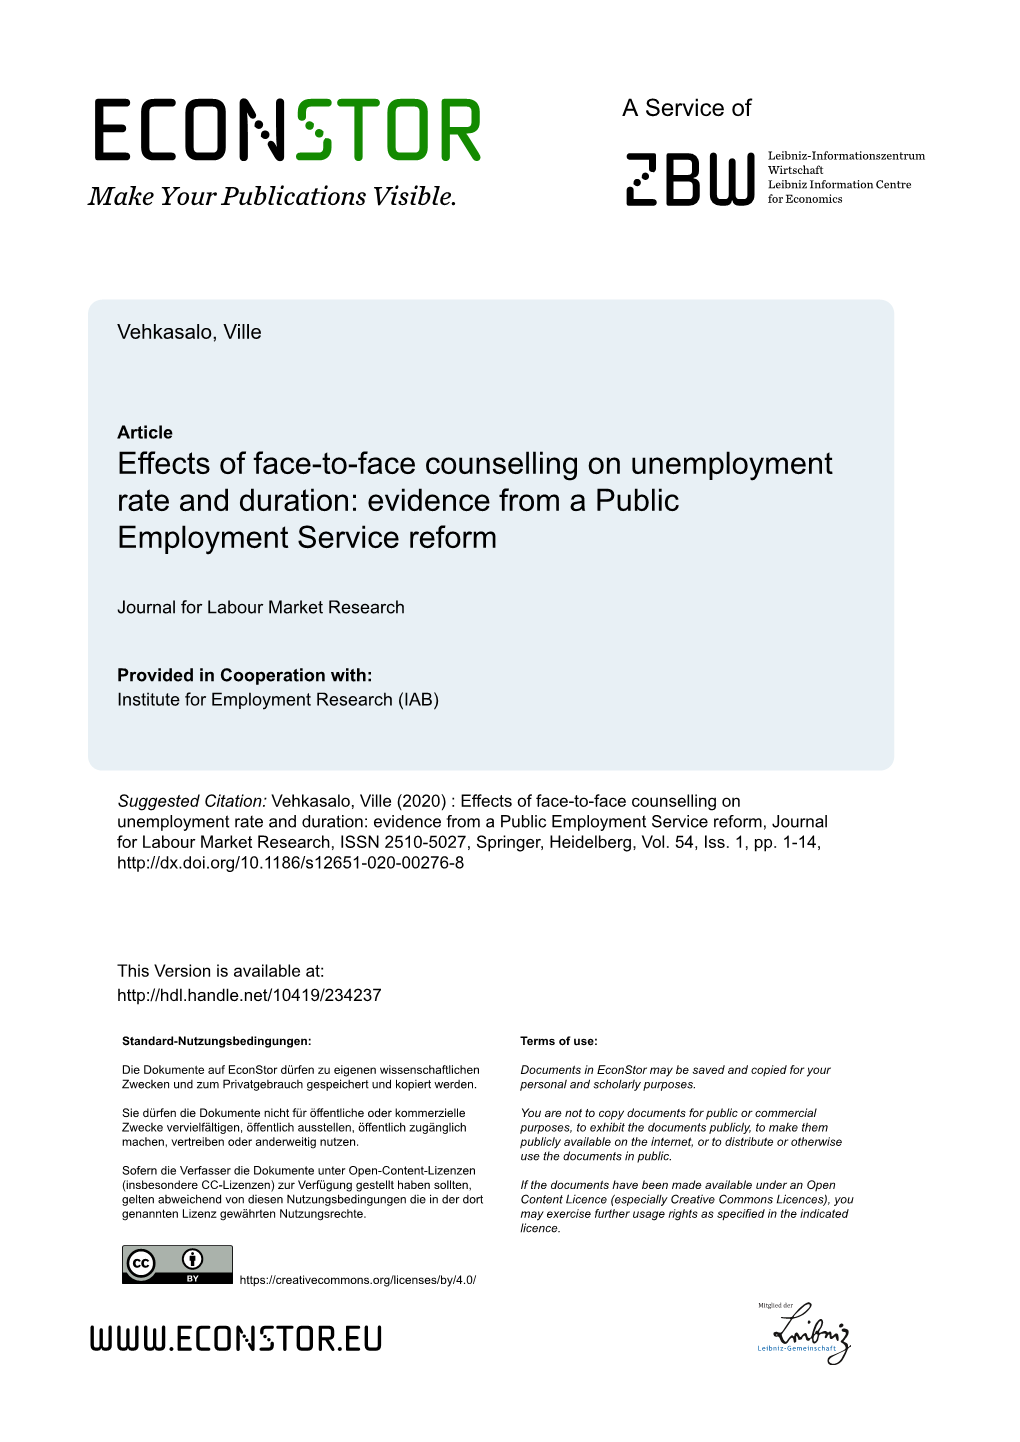 Effects of Face-To-Face Counselling on Unemployment Rate and Duration: Evidence from a Public Employment Service Reform